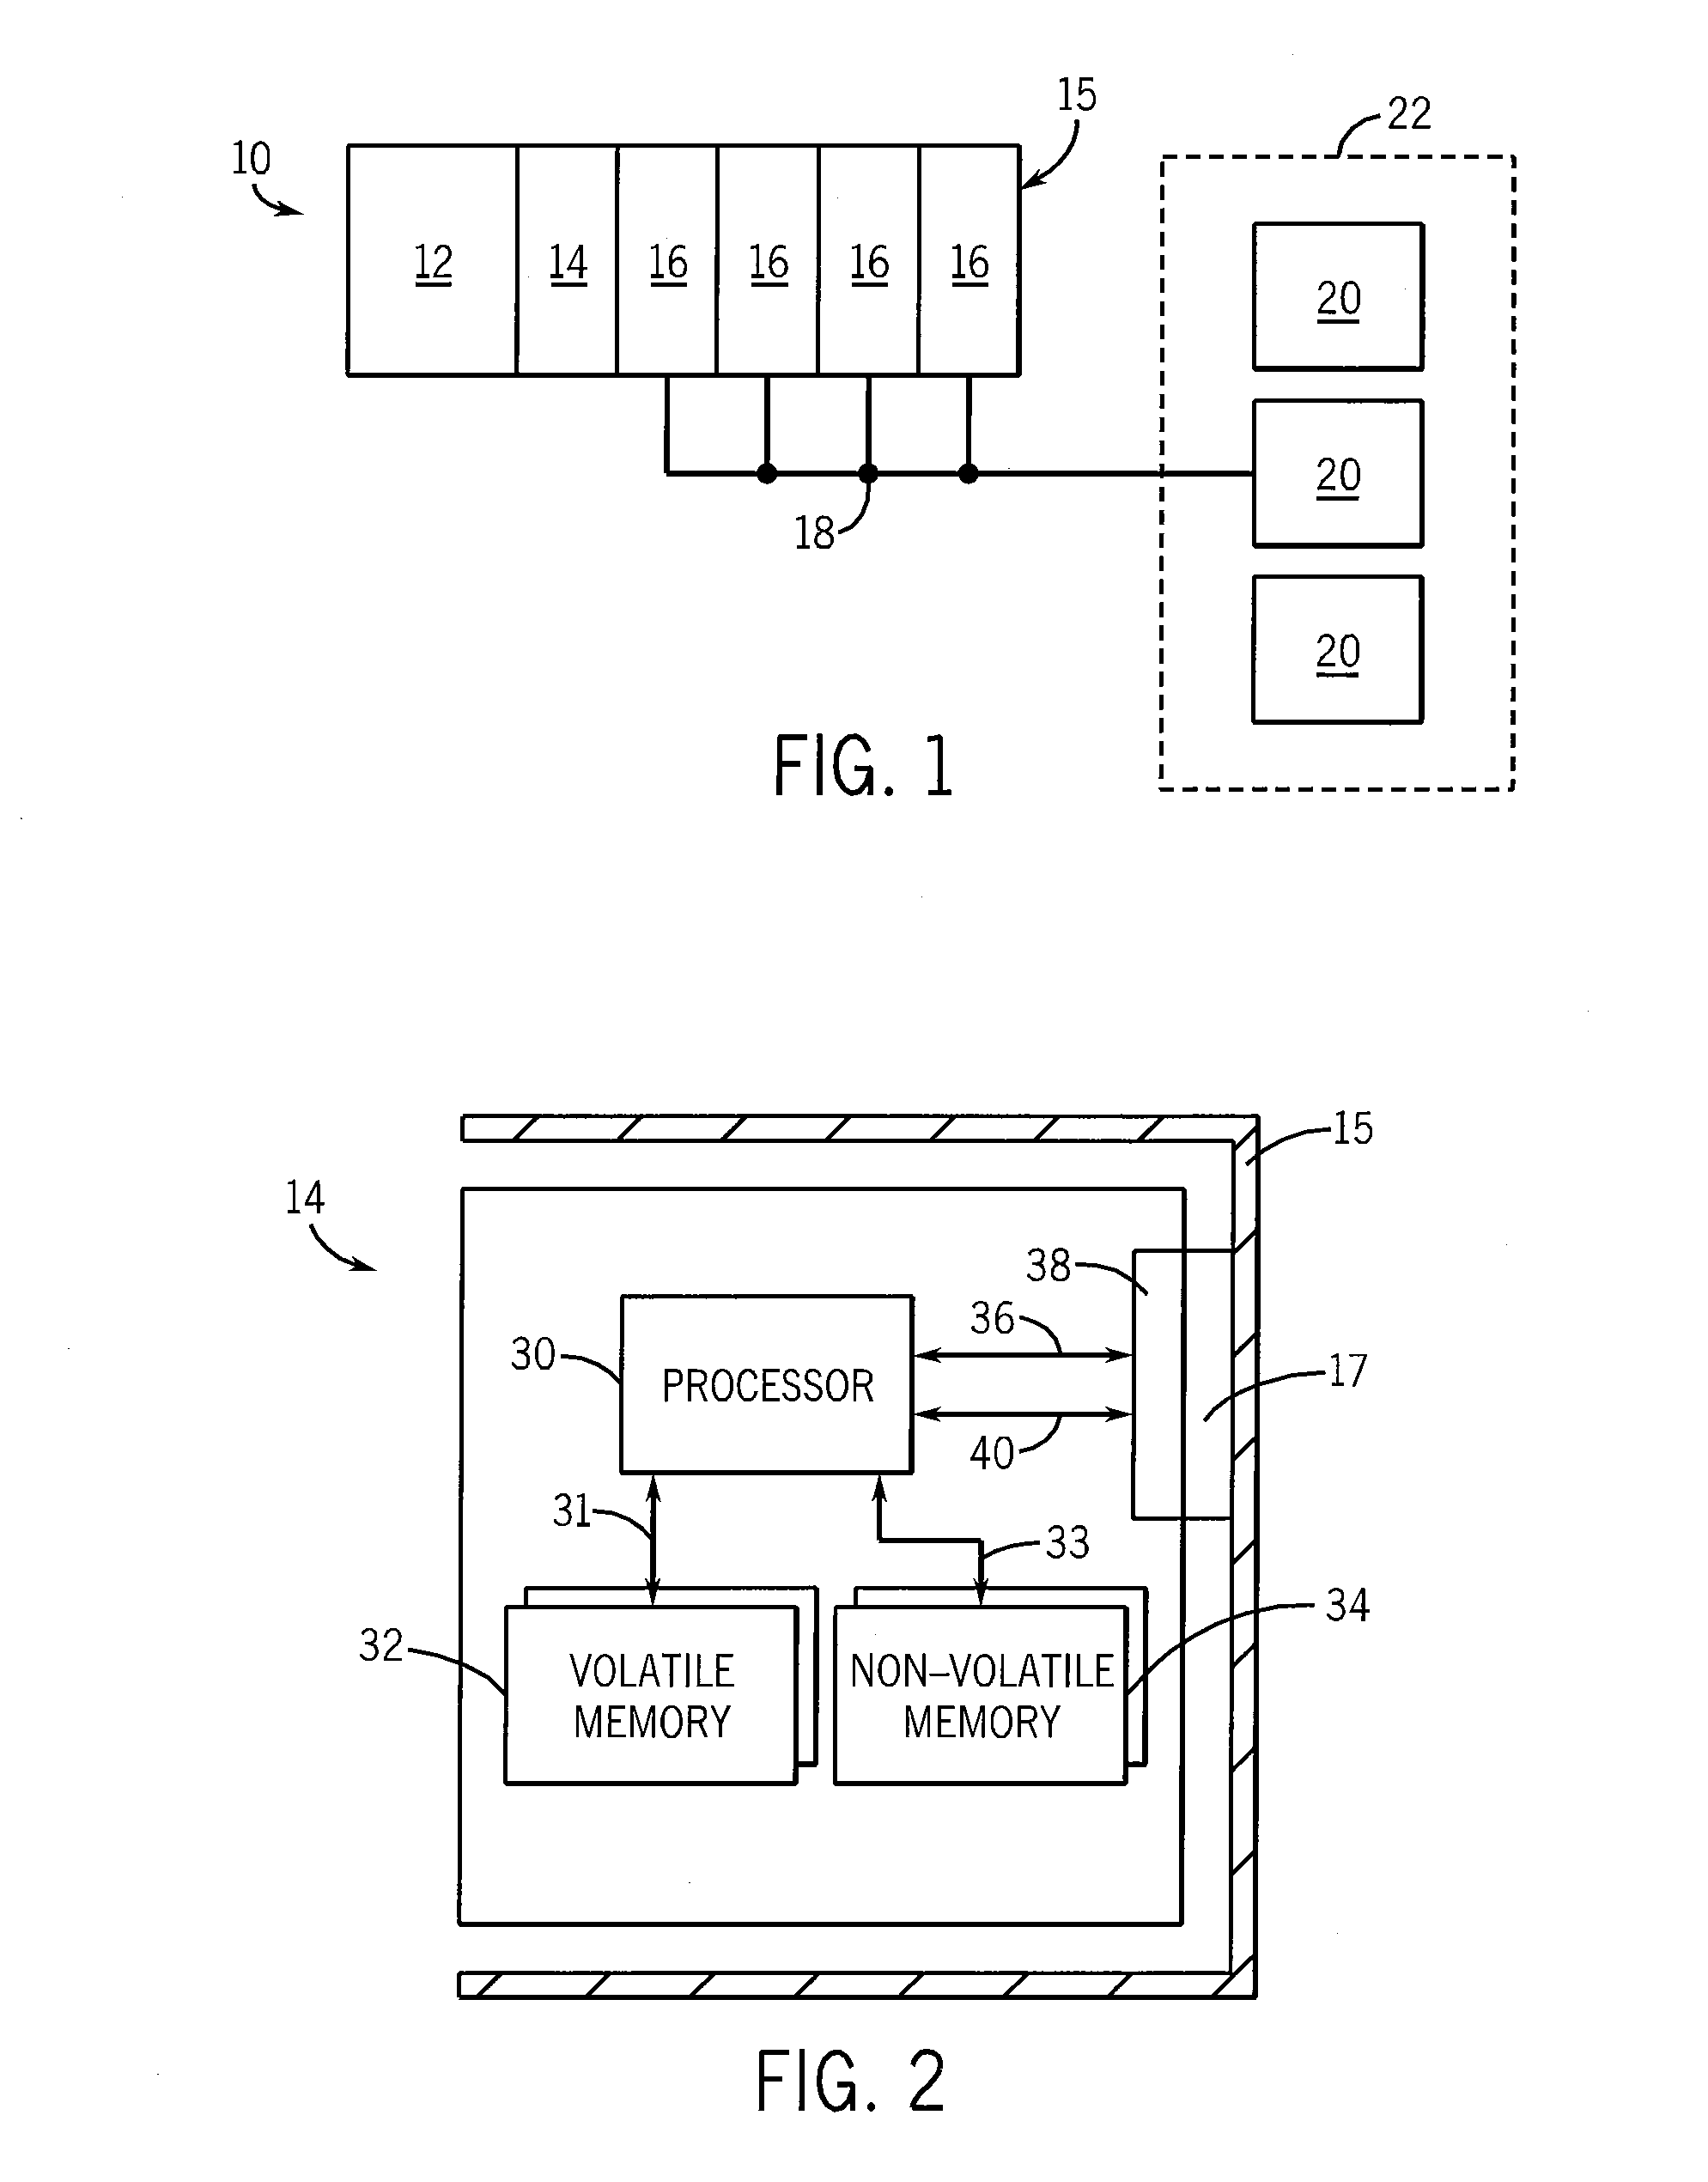 Method to Separate and Persist Static and Dynamic Portions of a Control Application